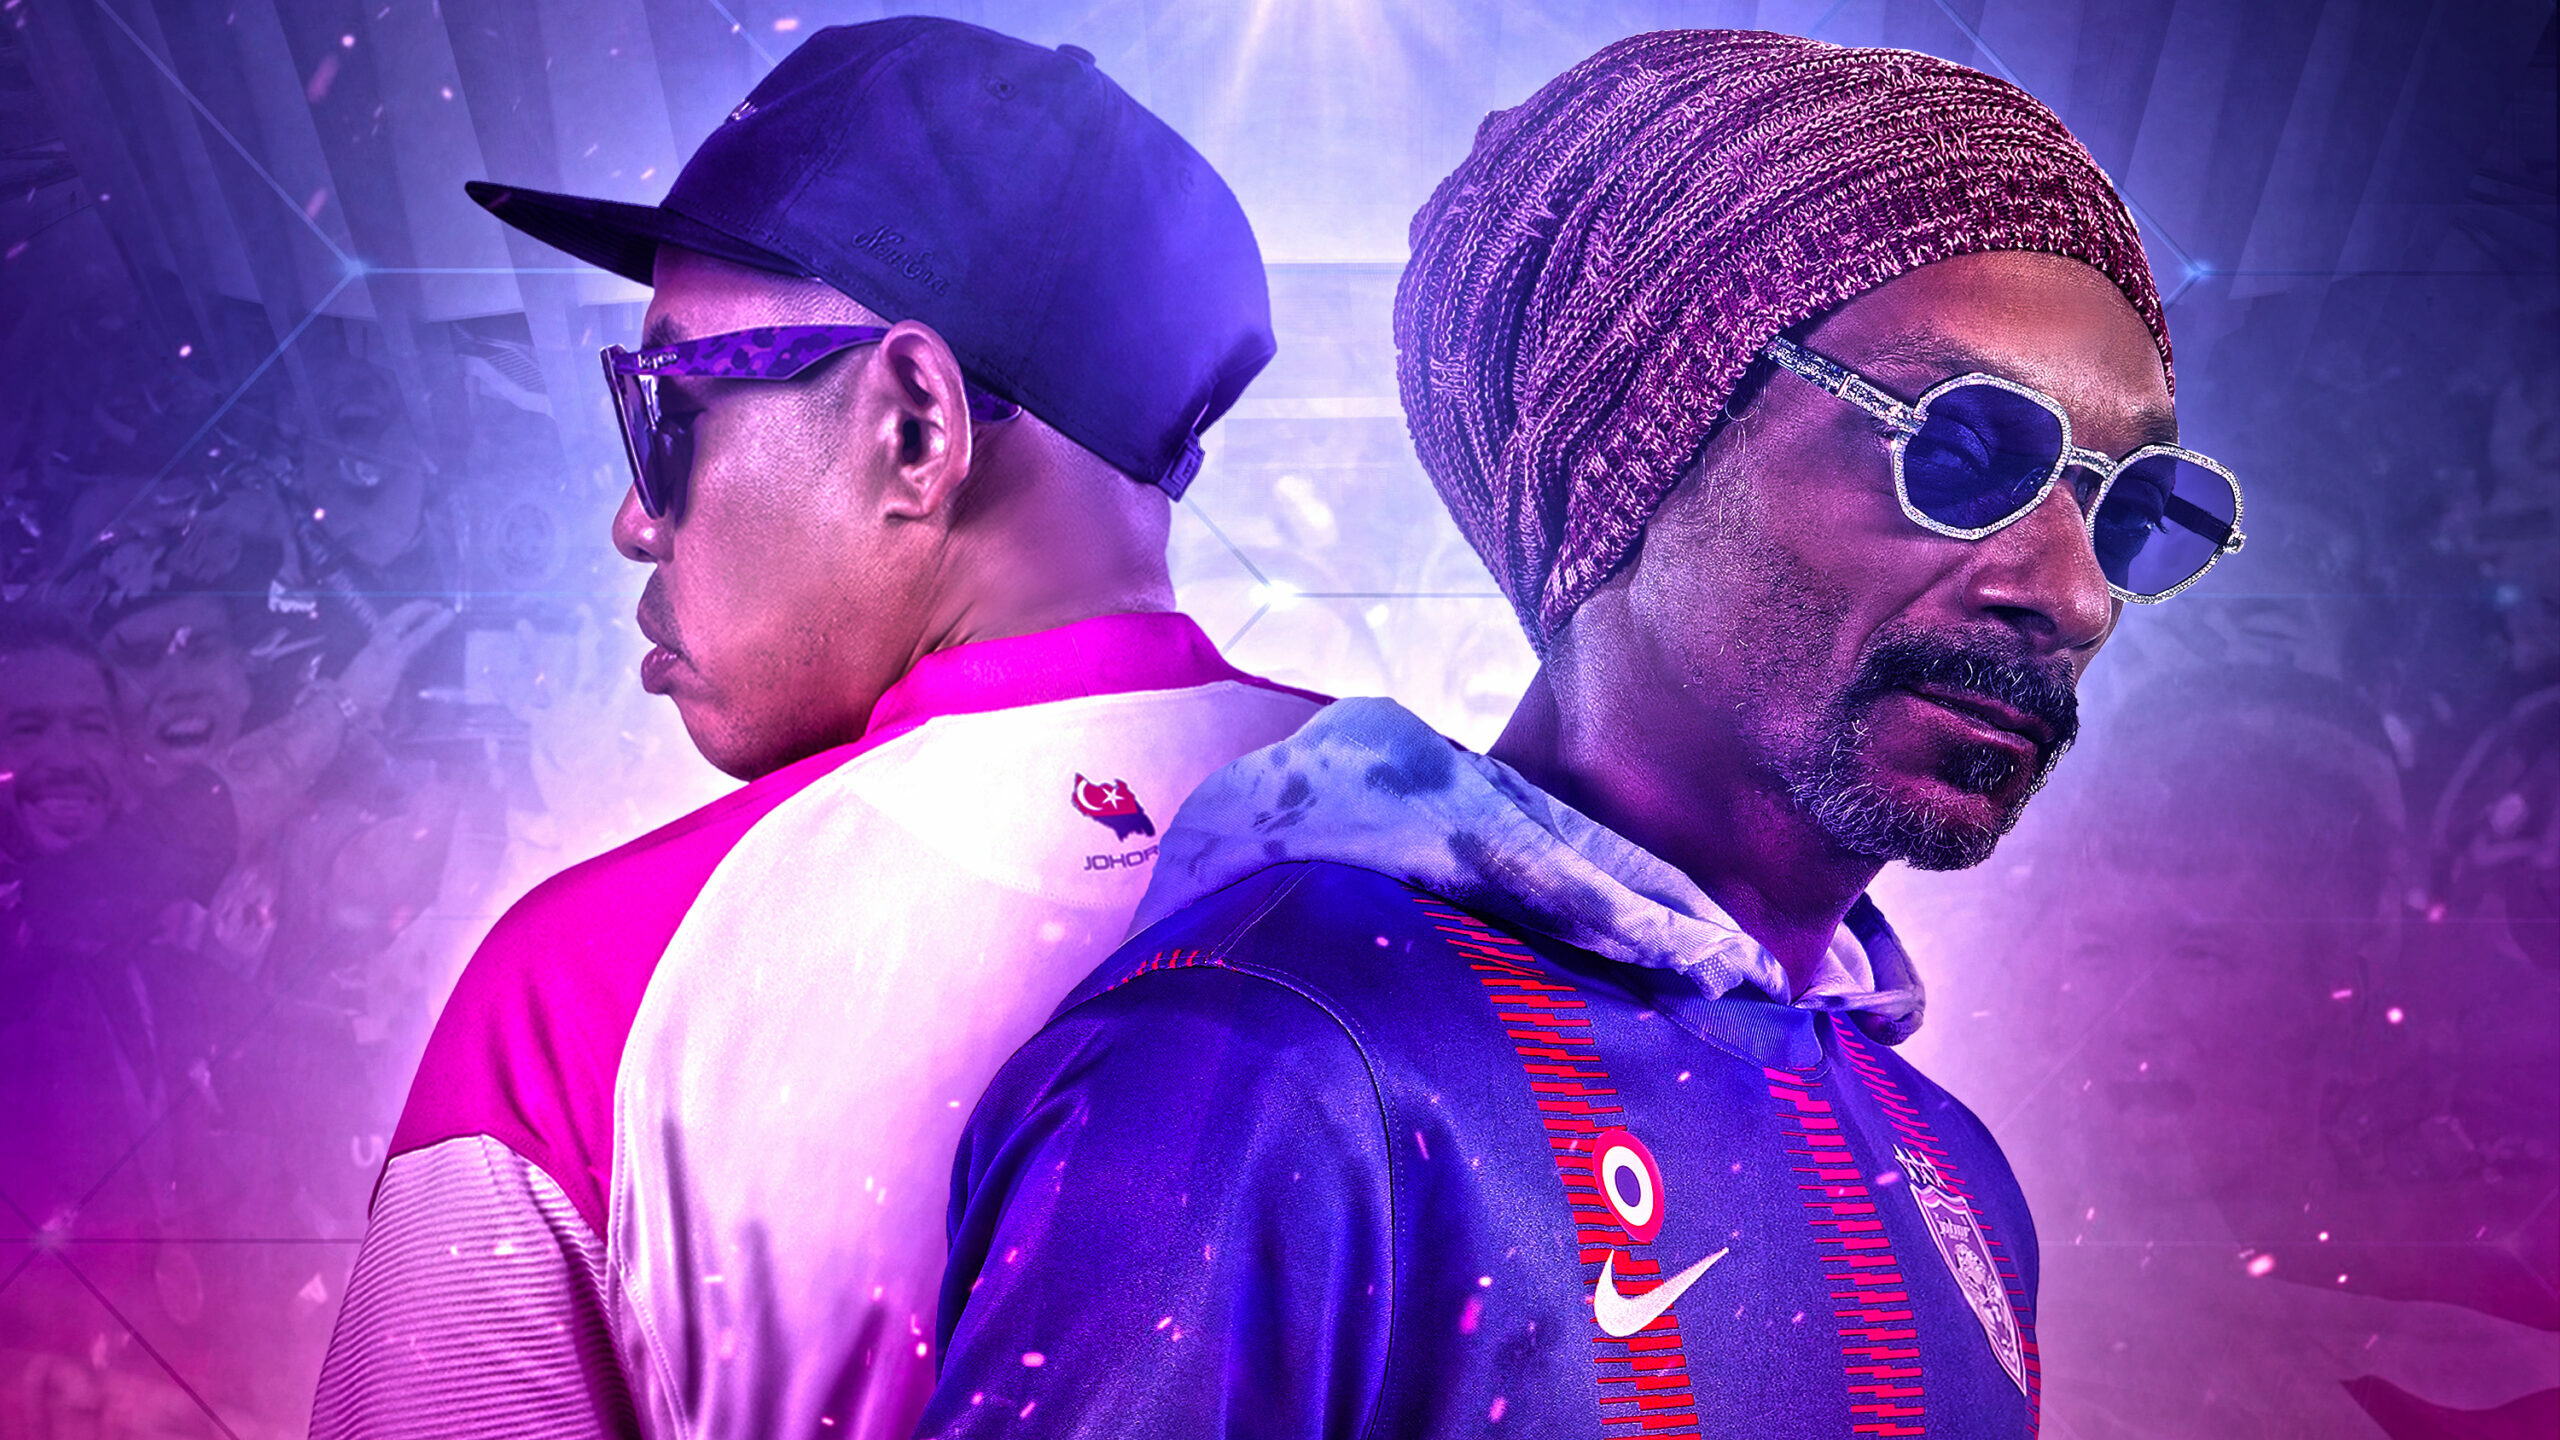 Universal strikes branding alliance with Malaysia’s Johor Darul Ta’zim Football Club… starting with a new song from Snoop Dogg and Joe Flizzow – Music Business Worldwide